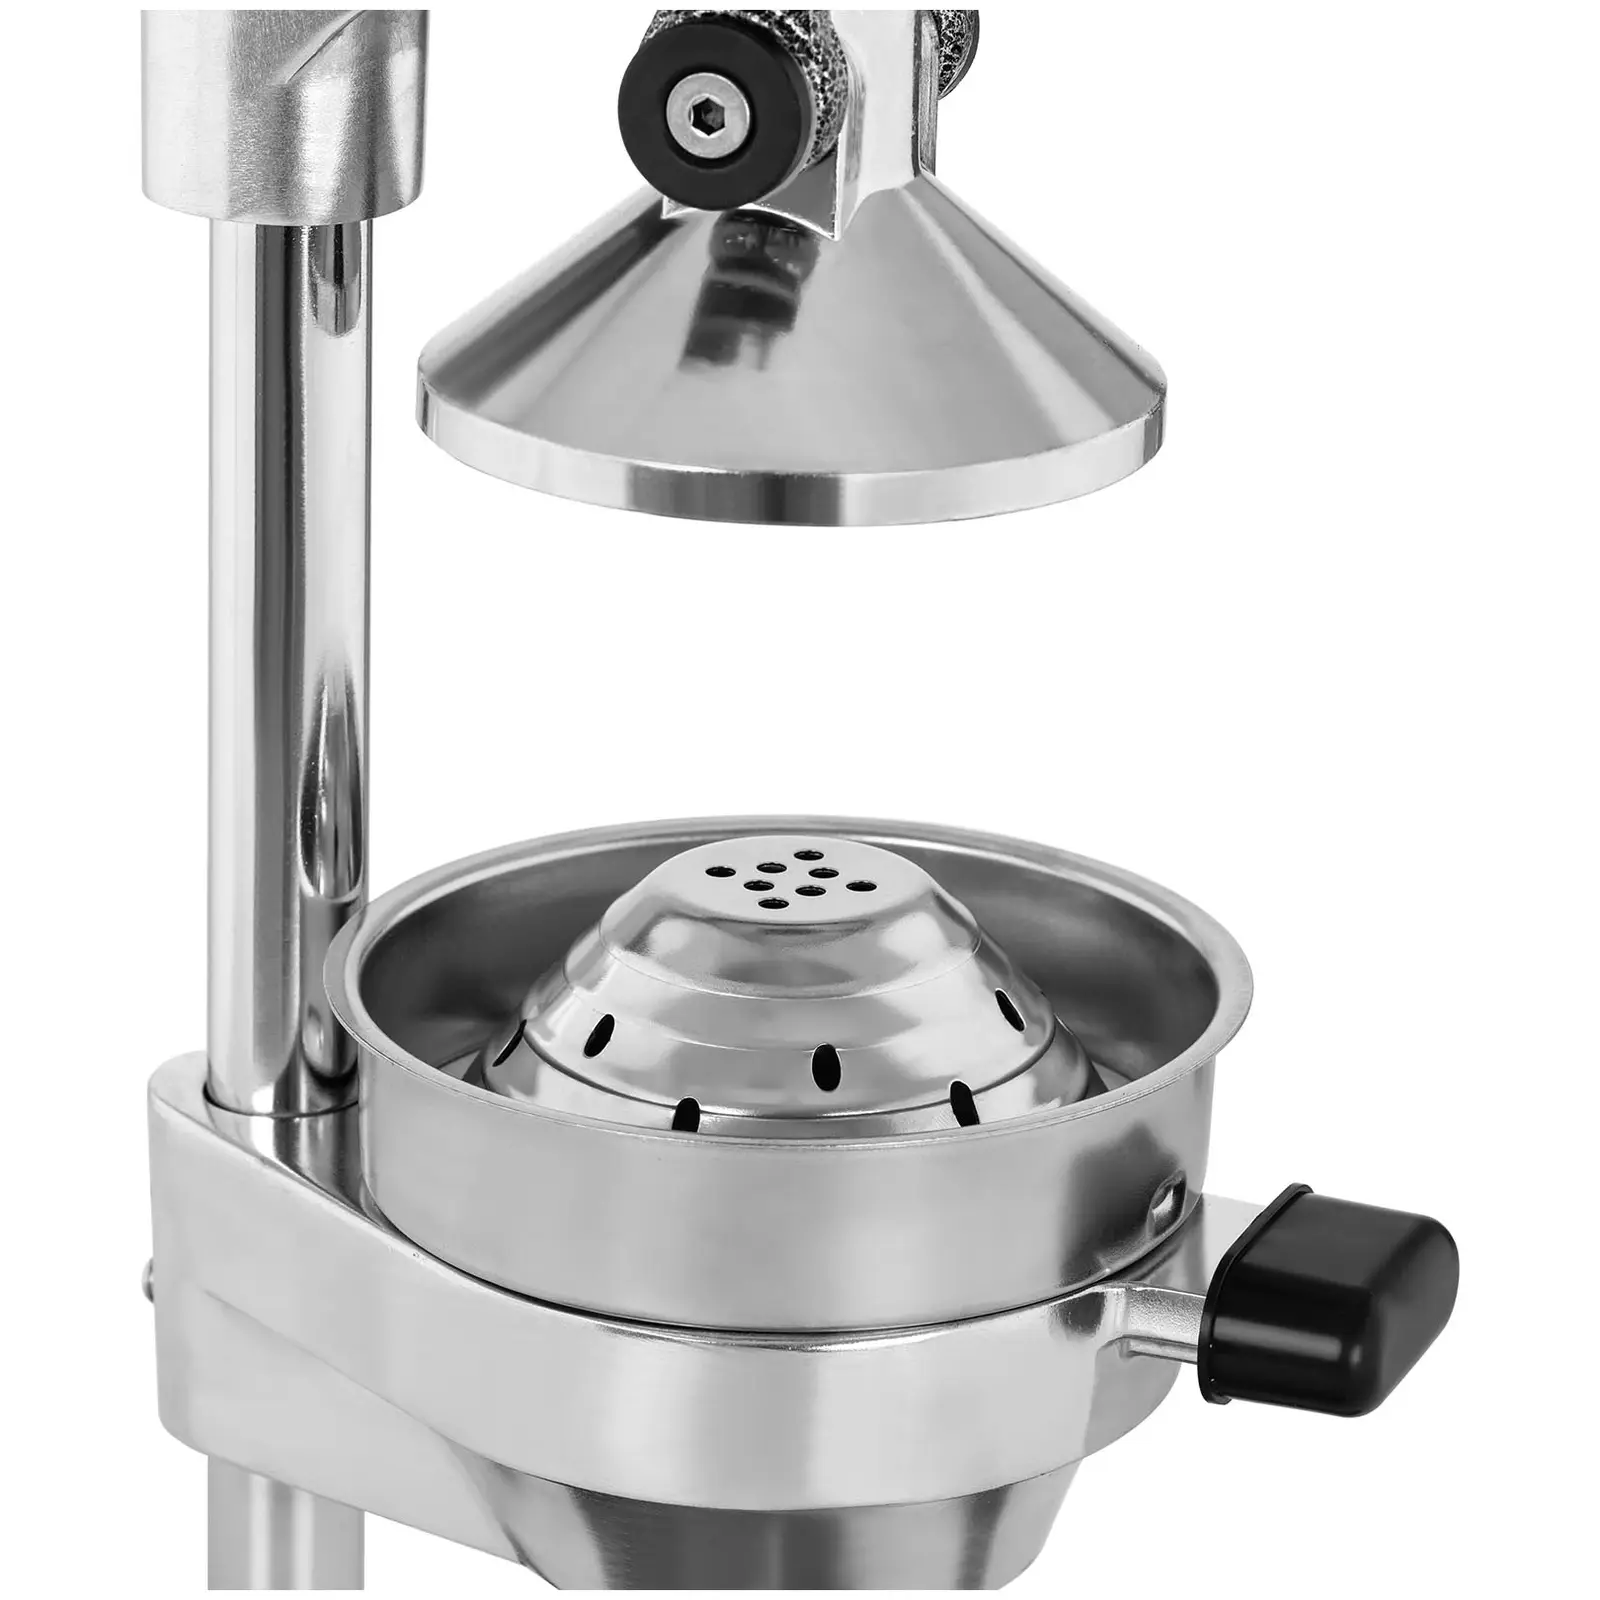 Professional Juicer - cast iron and stainless steel - manual